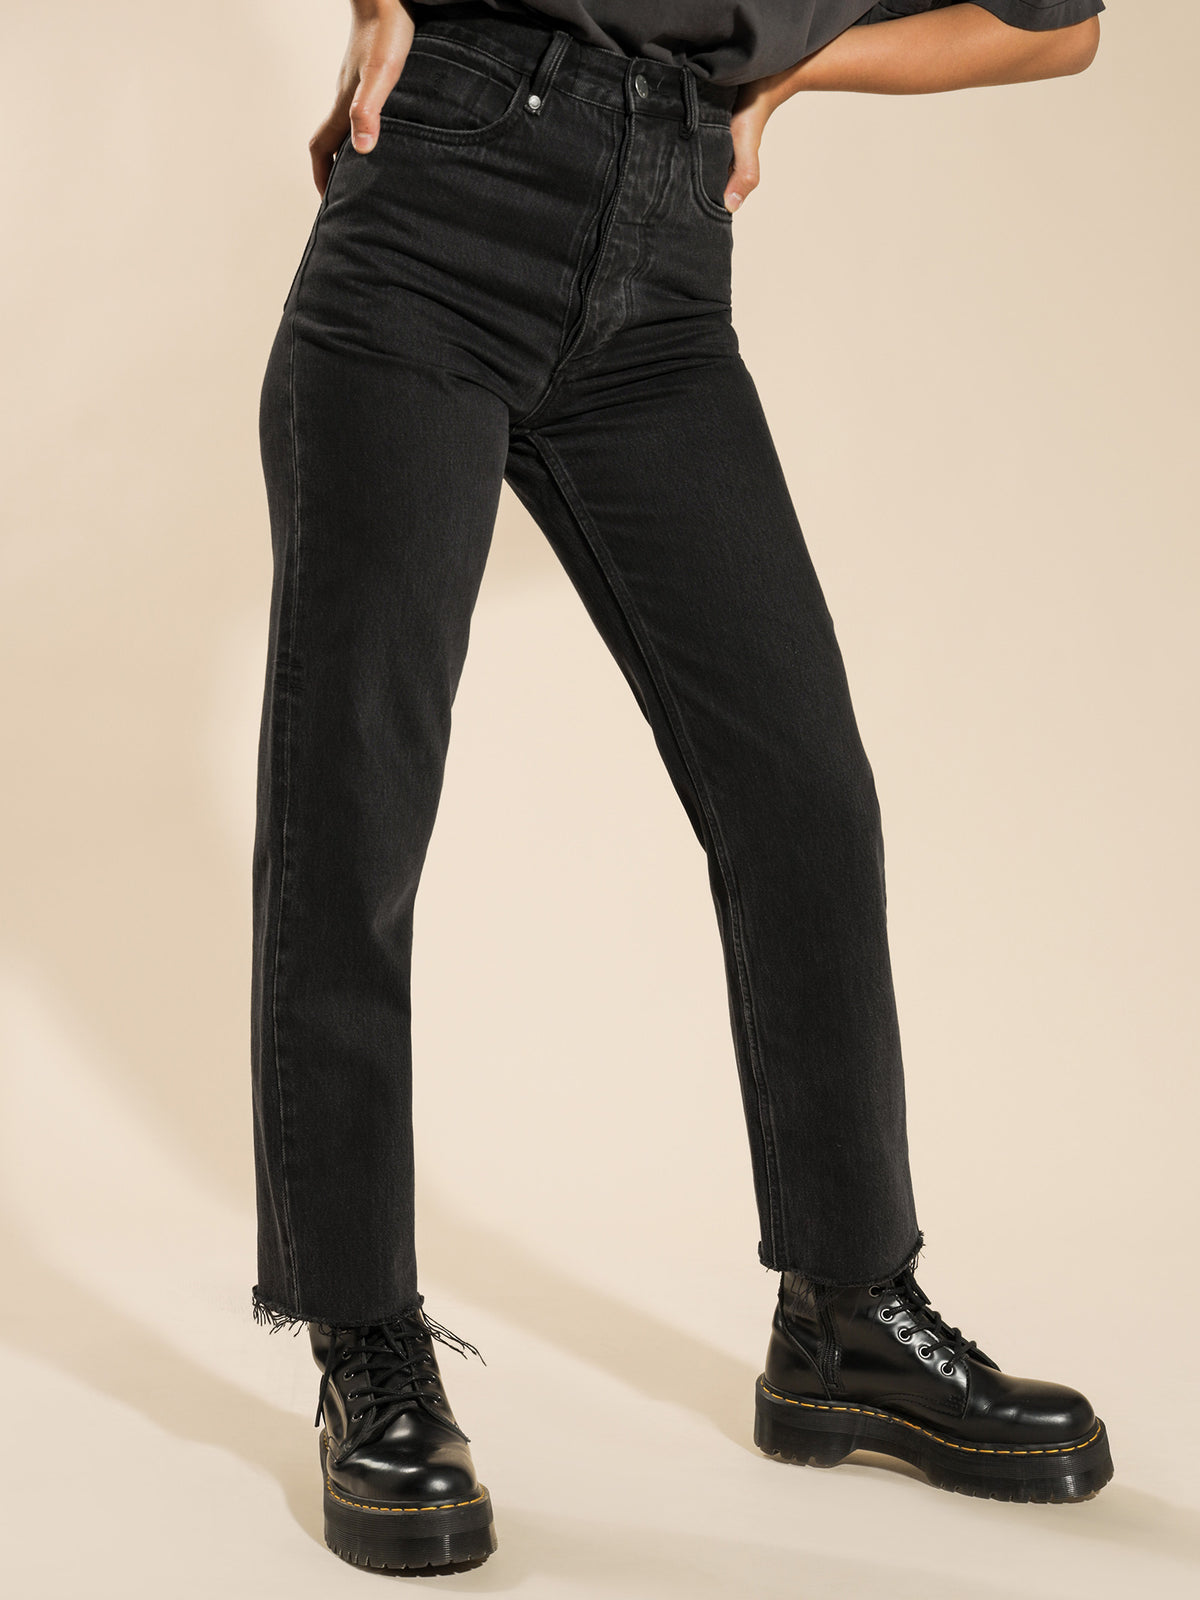 Paige Jeans in Black Rinse